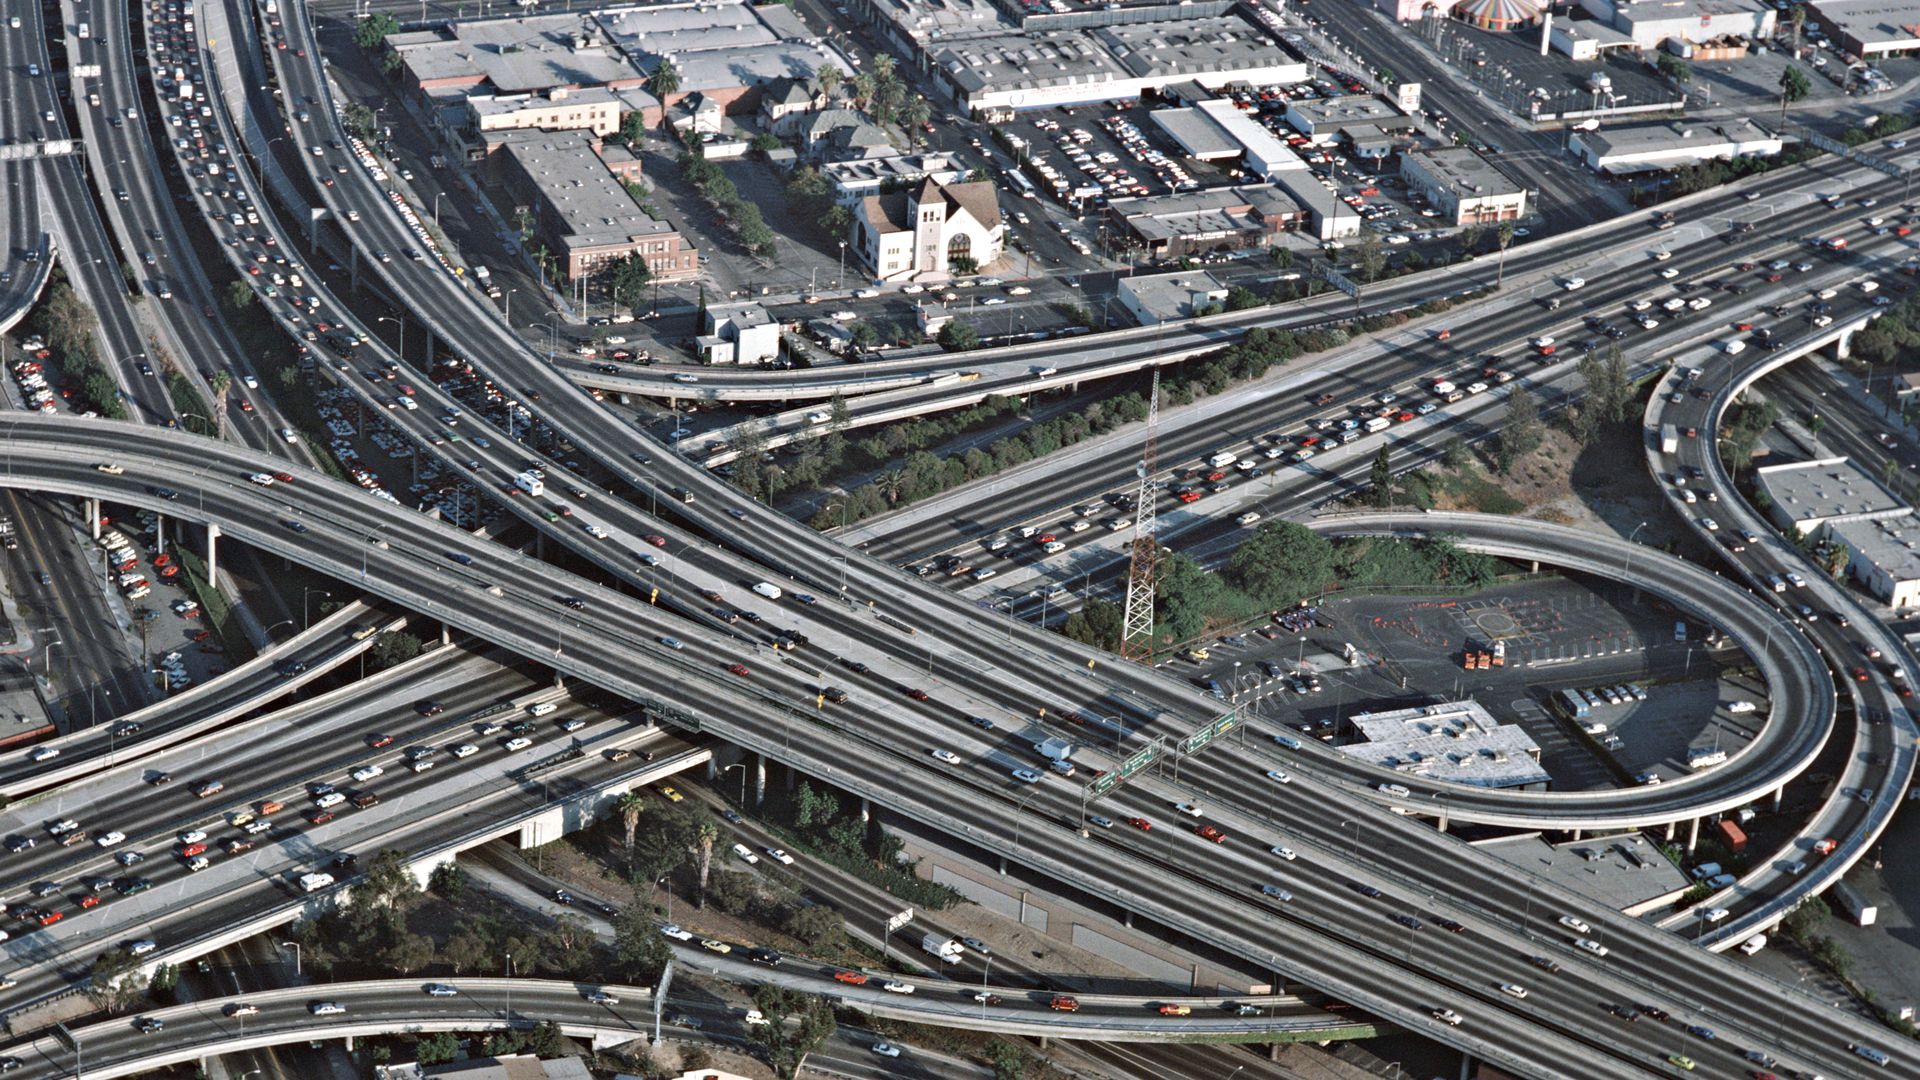 An aerial view of the freeways in Los Angeles